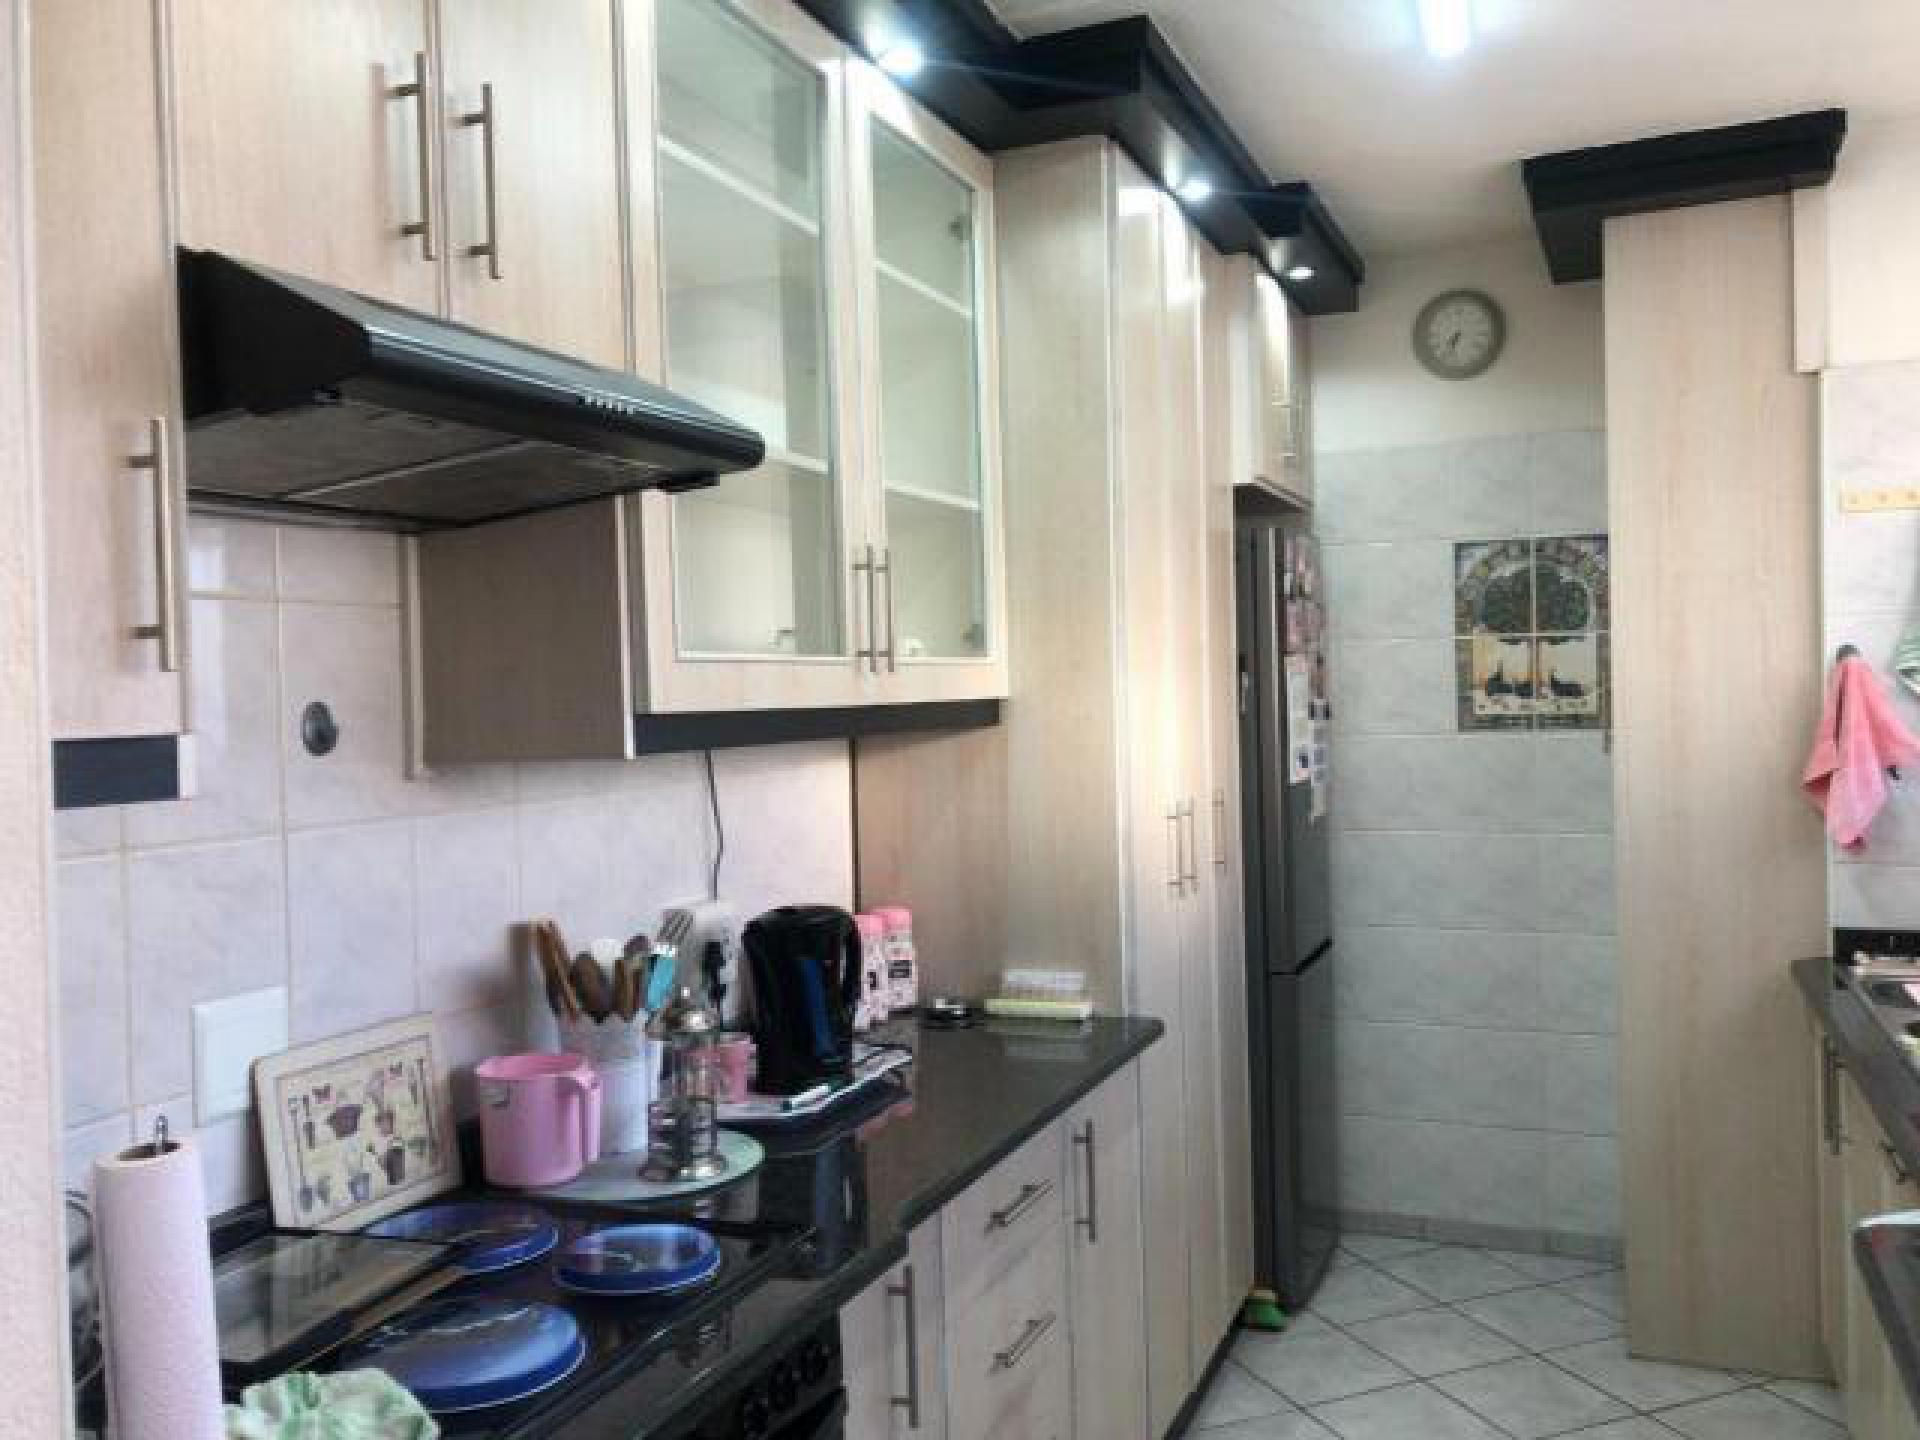 Kitchen of property in Pioneer Park (Newcastle)